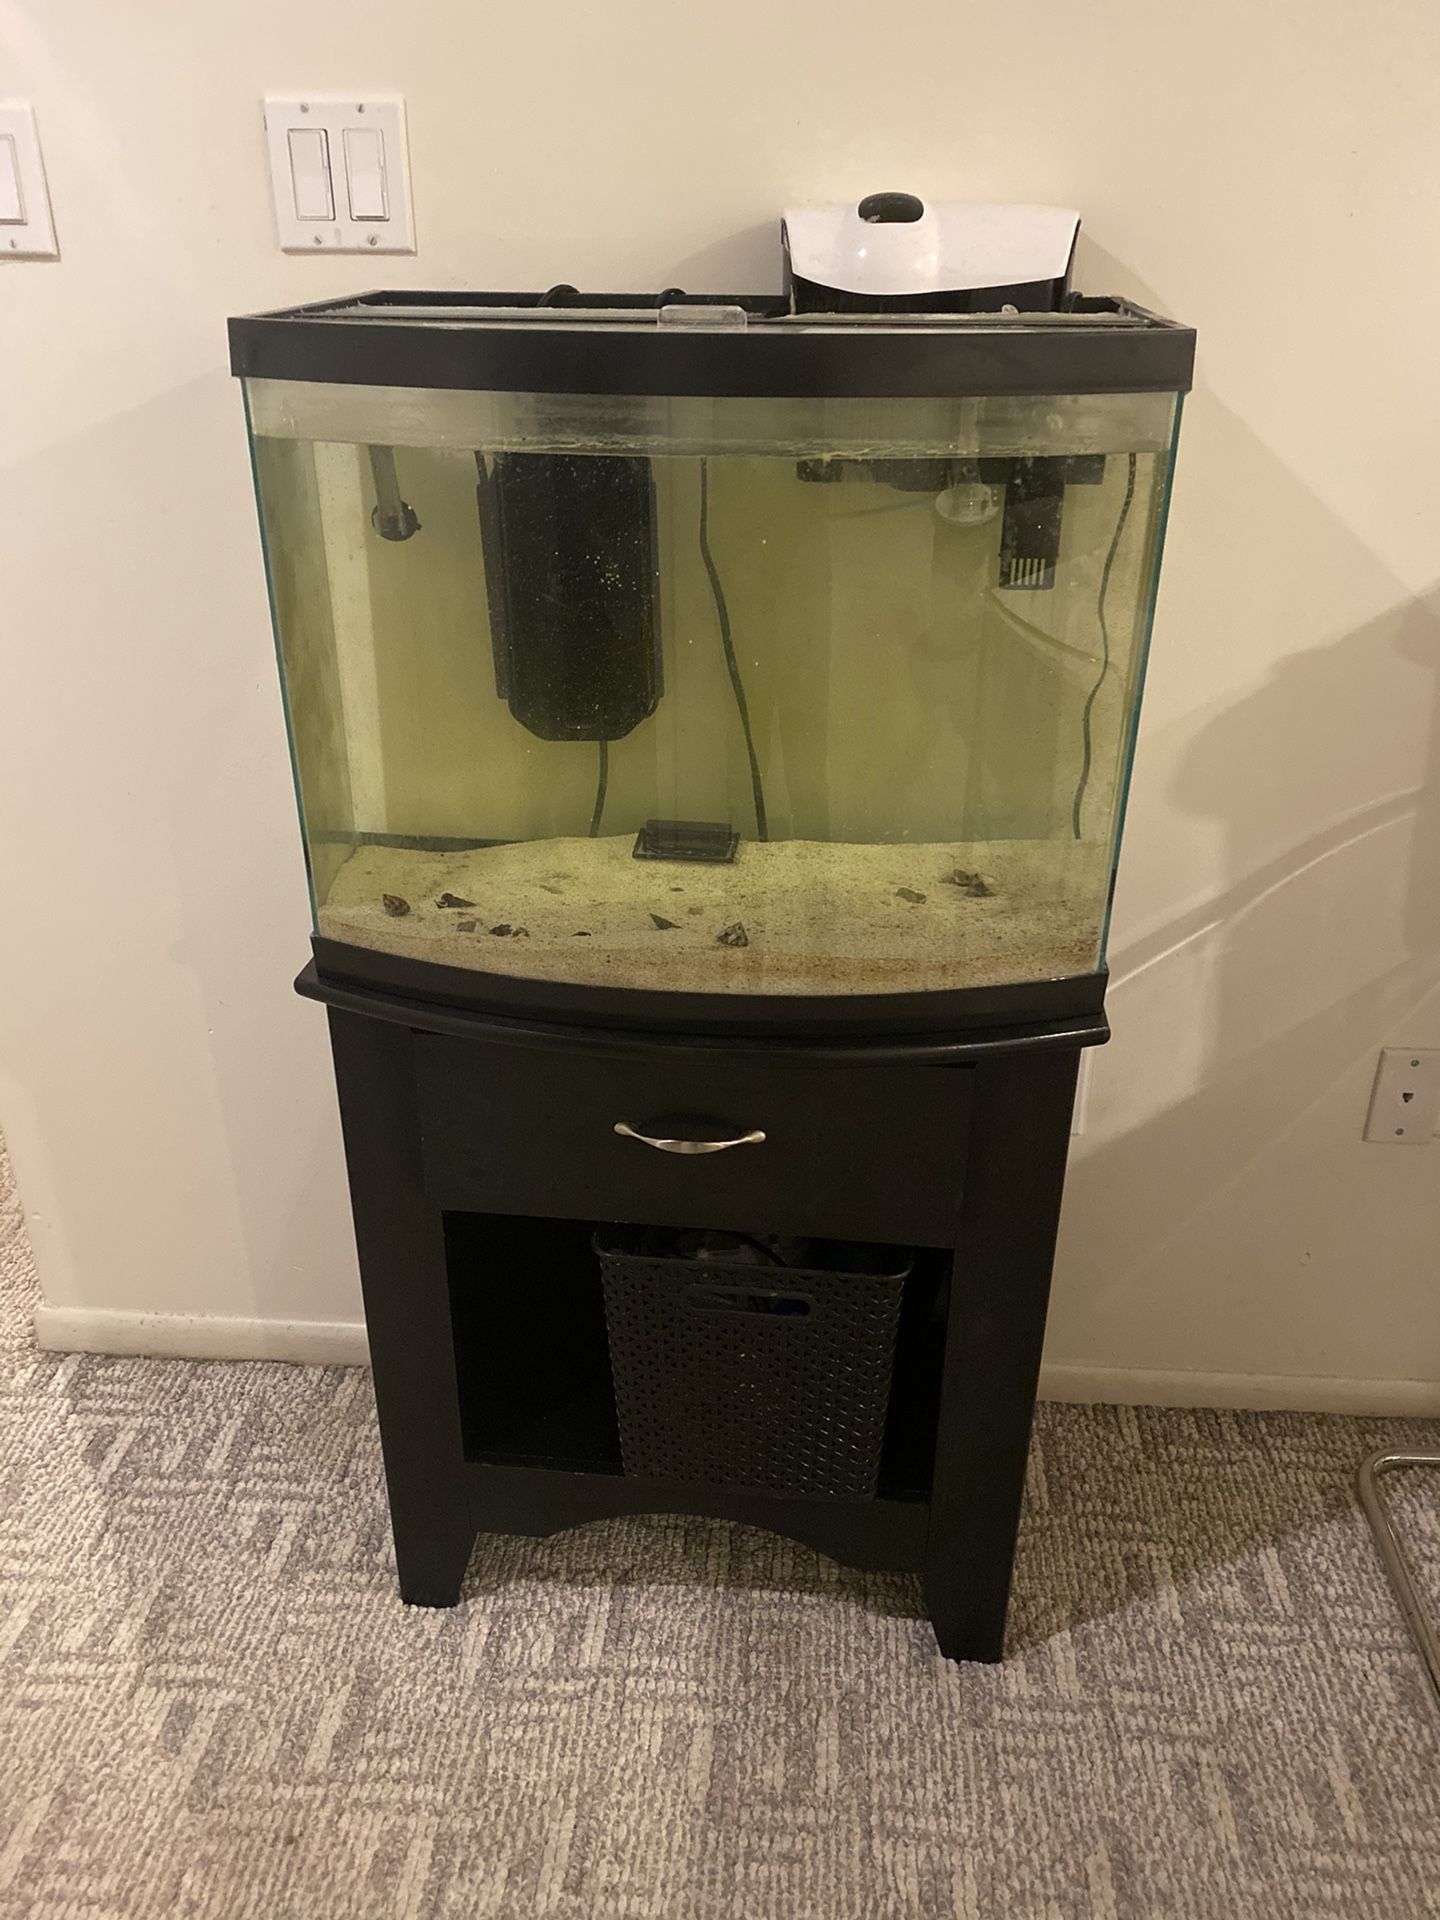 Salt water Aquarium 30Gl complete and working perfect